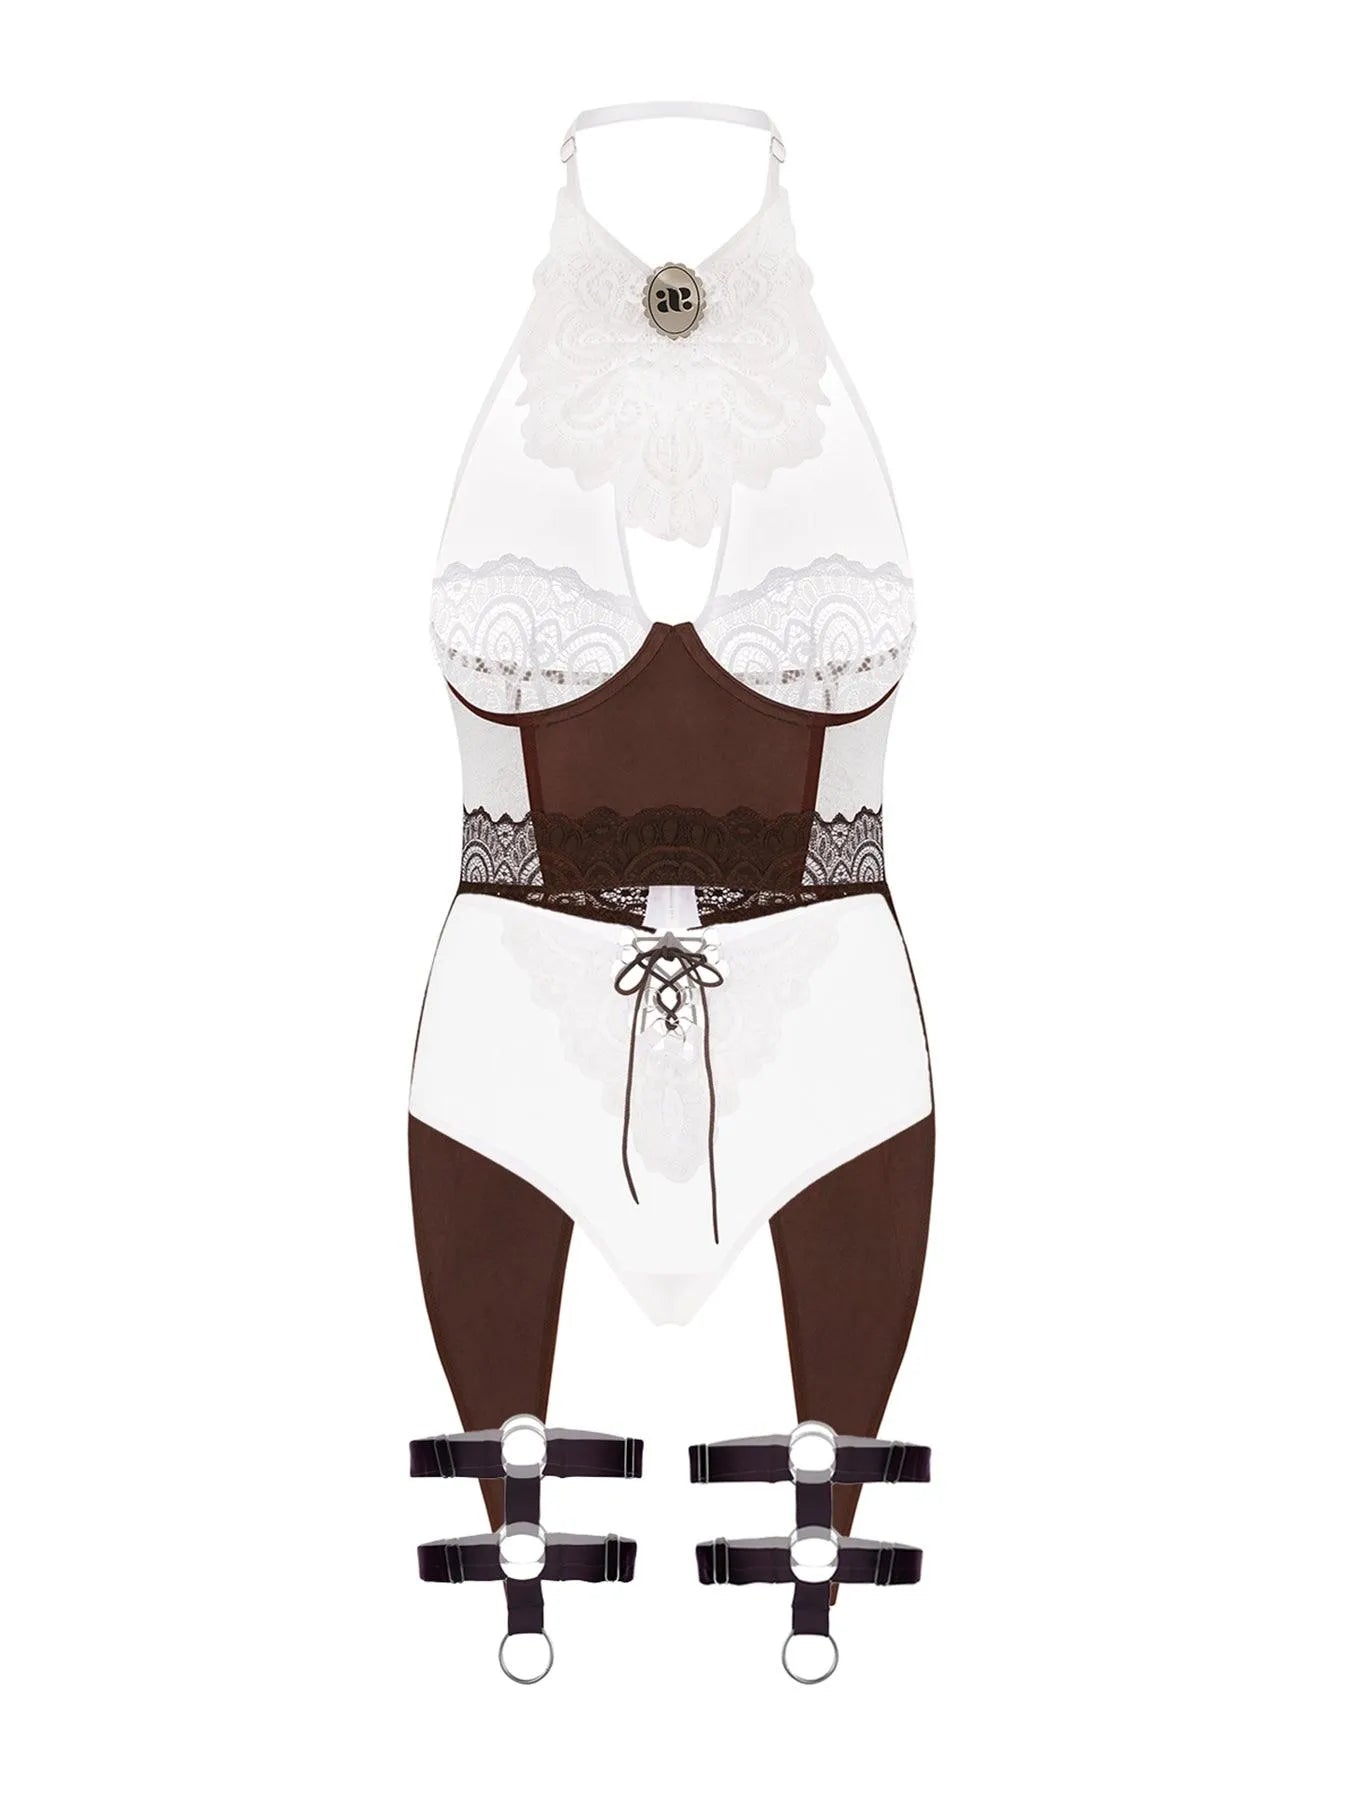 ᐉ ROLE-PLAYING LINGERIE SET HORSEWOMAN — Buy ROLE-PLAYING